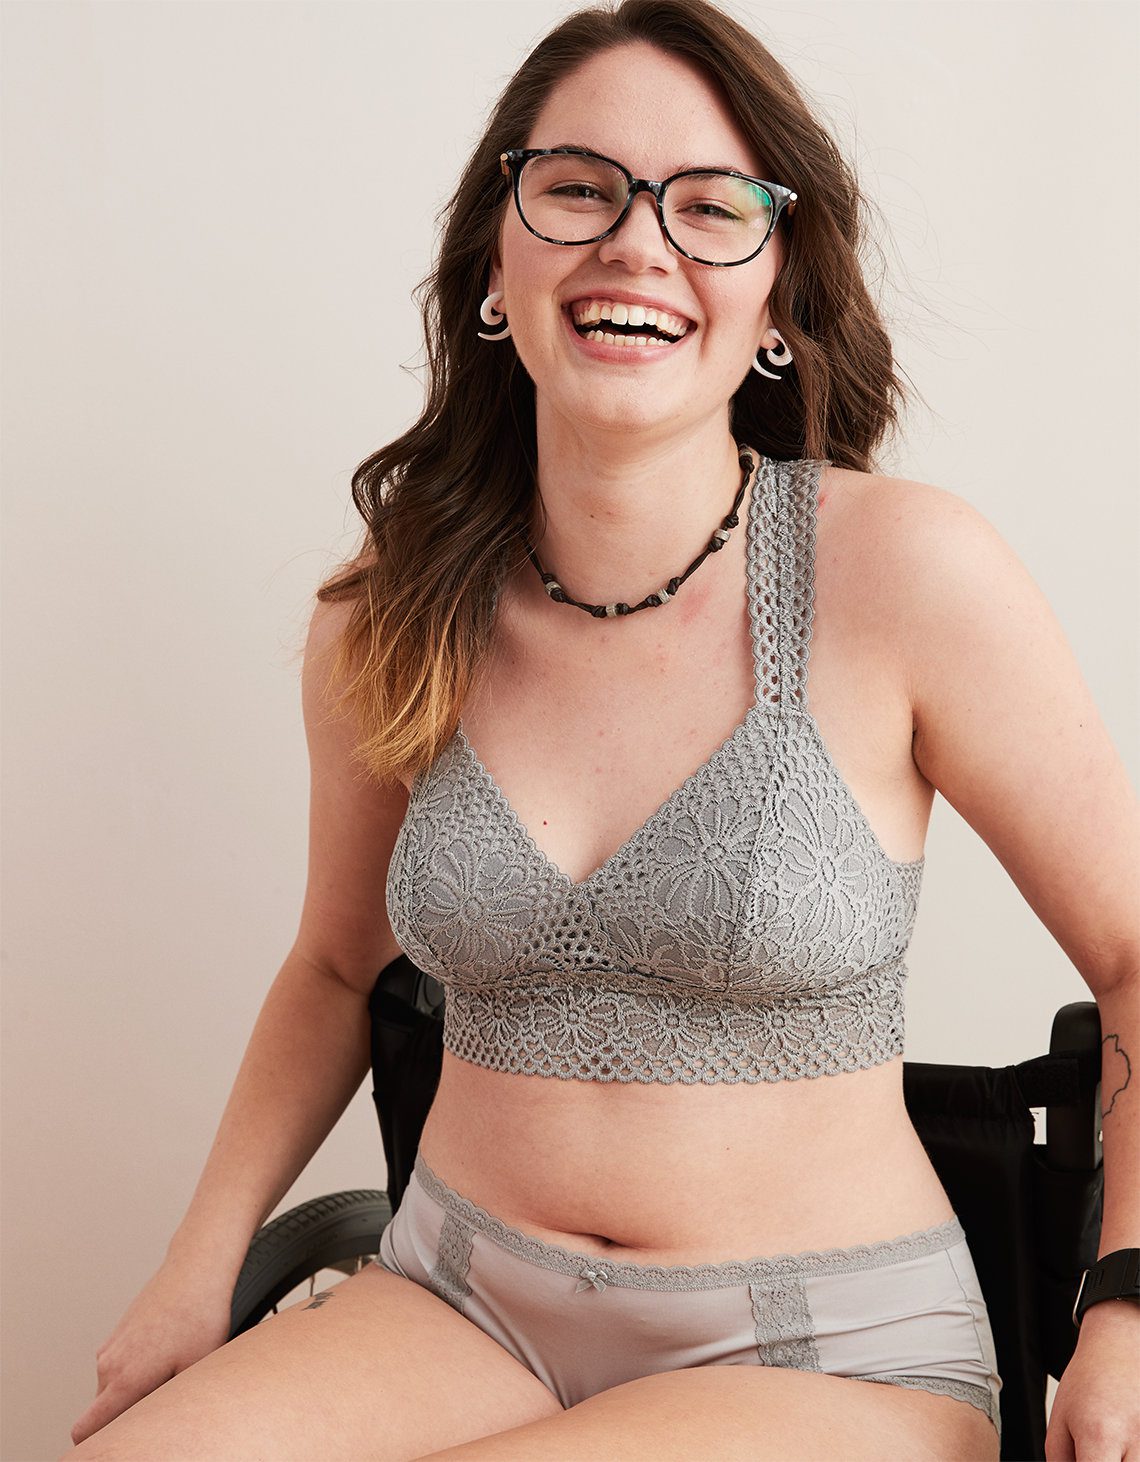 Aerie Lingerie Campaign Uses Unretouched Photos Of Real Women